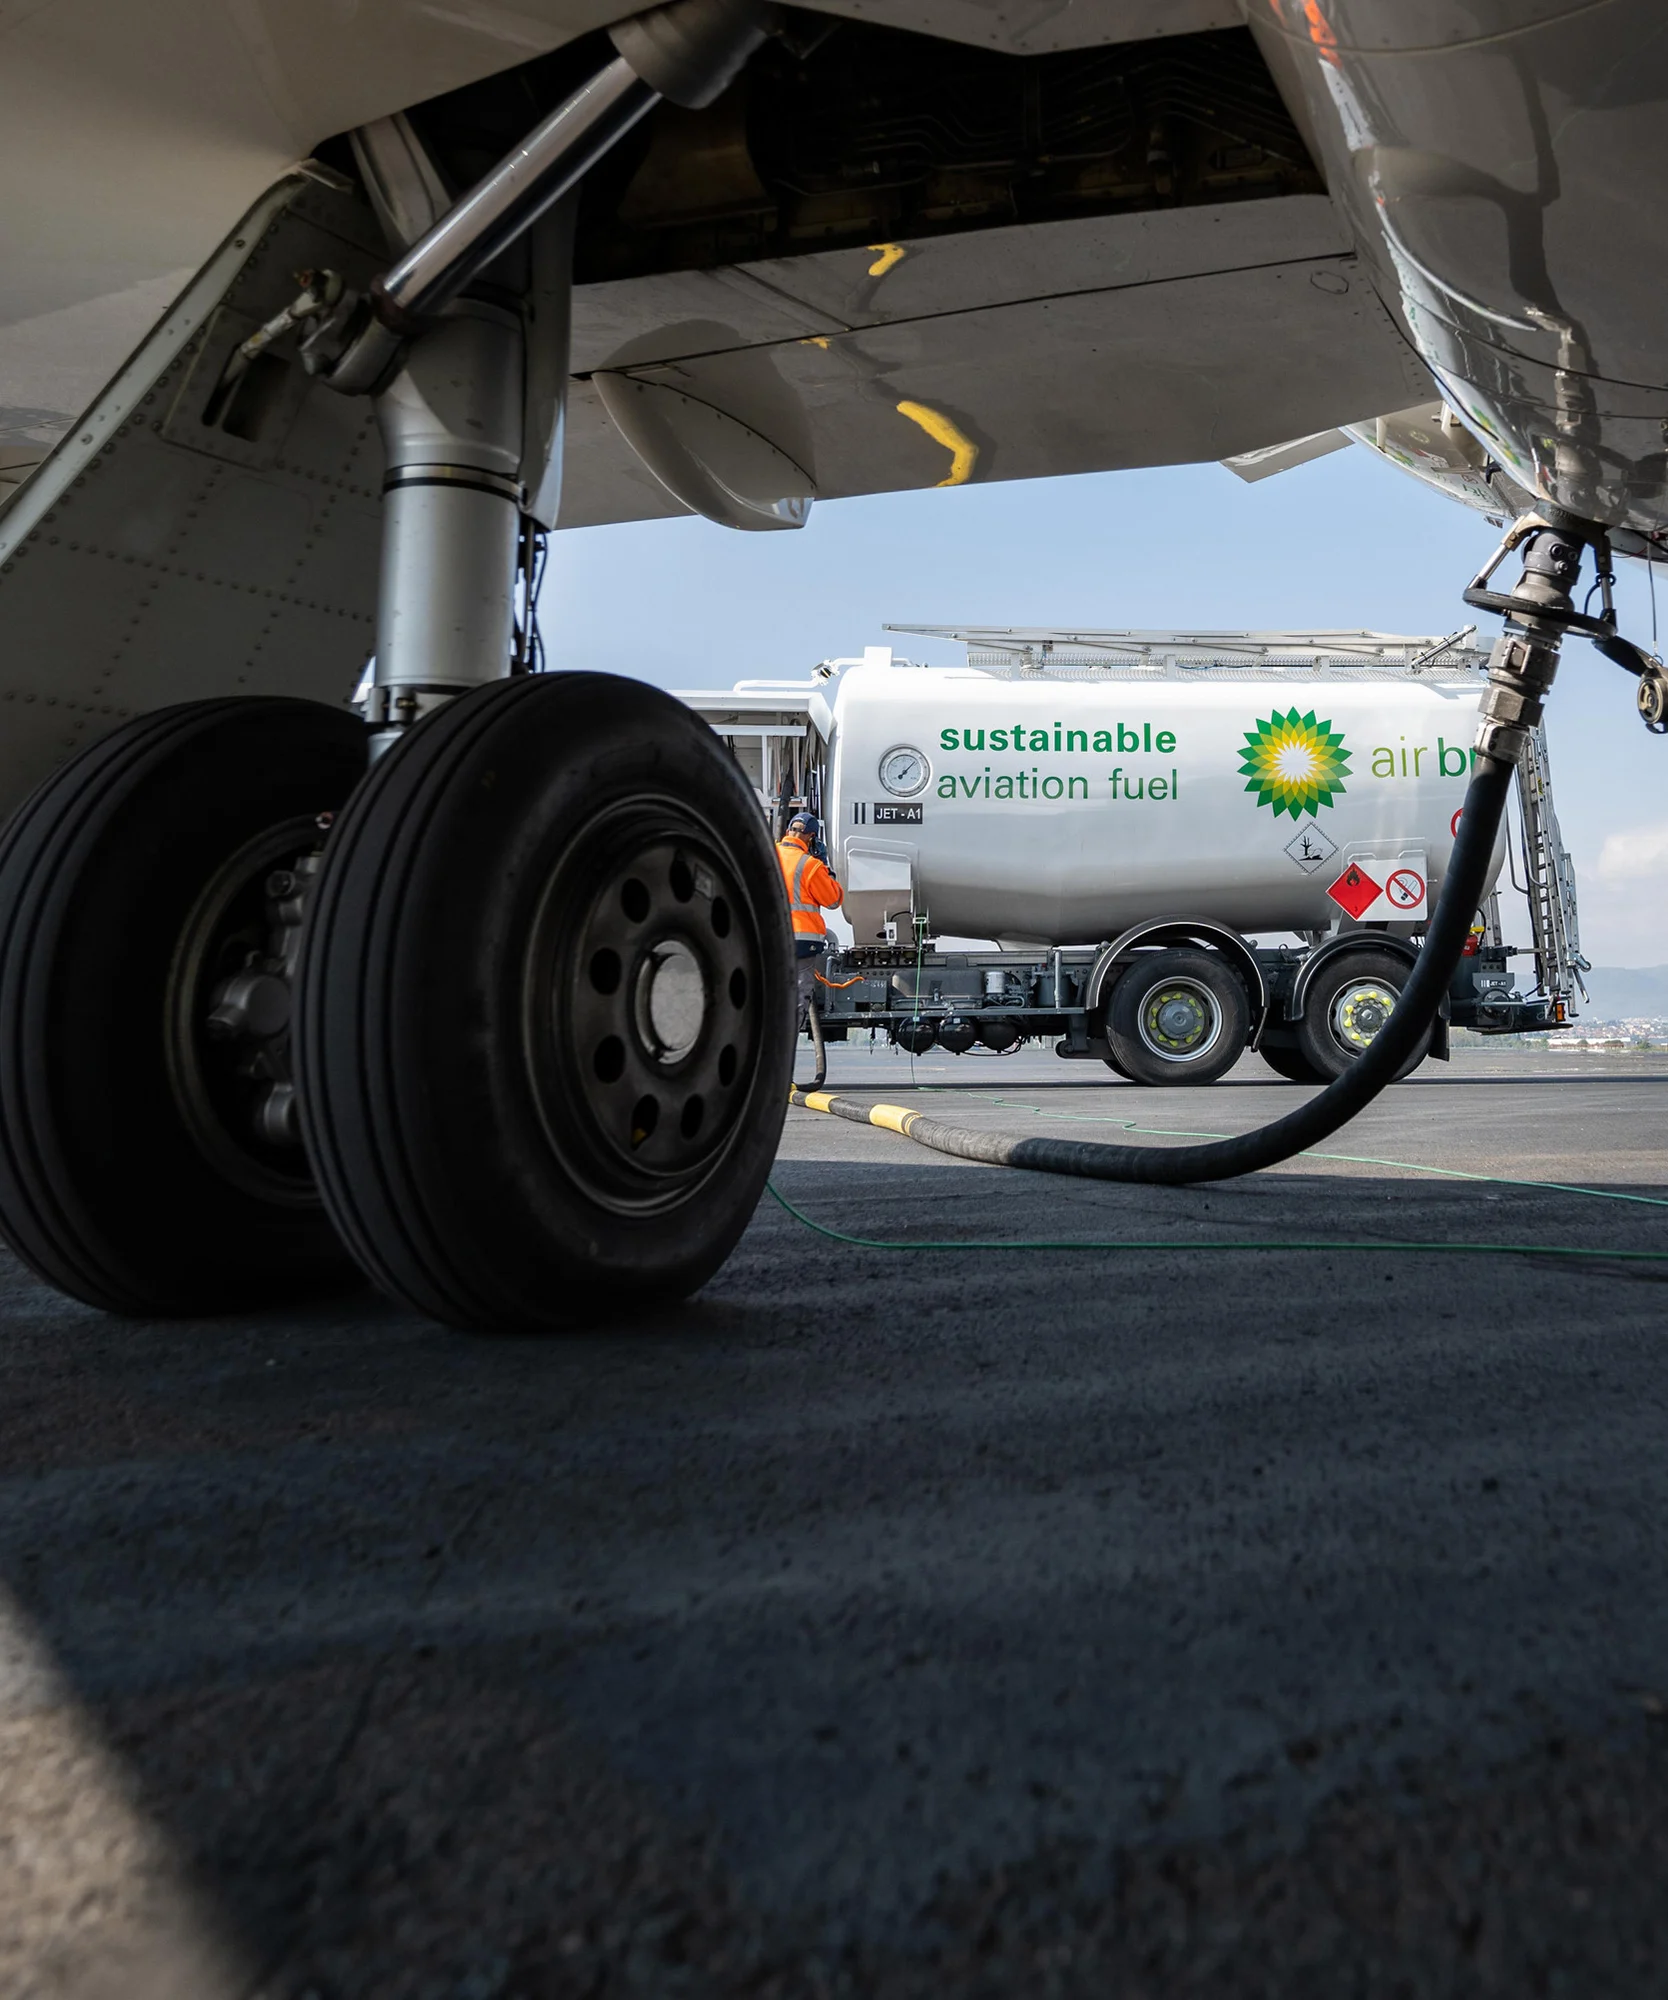 Air bp refuels an aircraft with sustainable aviation fuel